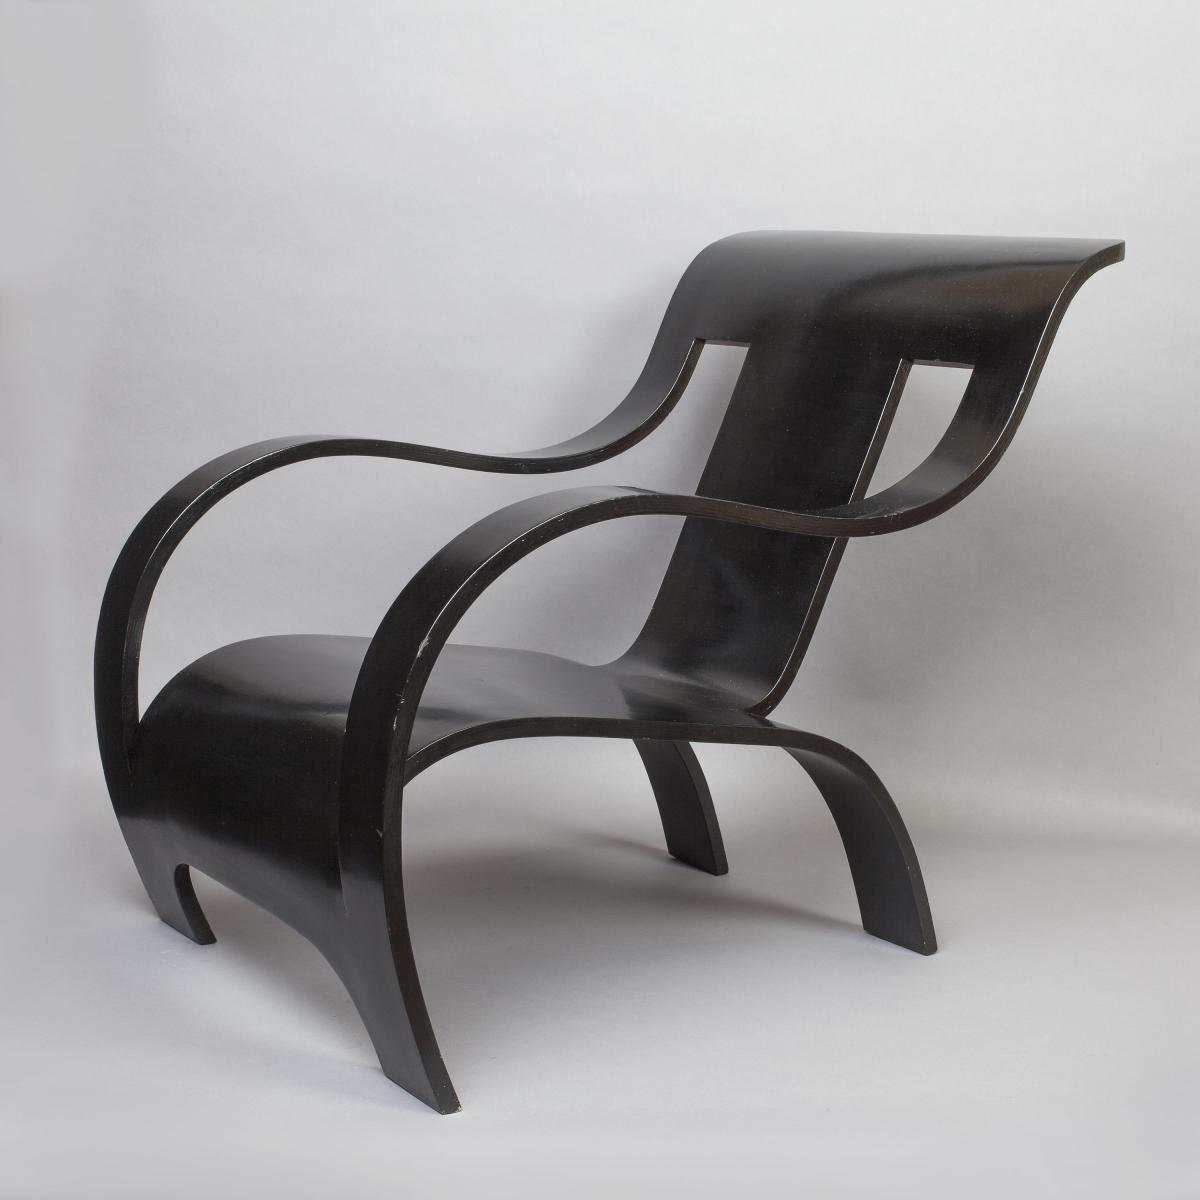 A Black Bent Plywood Armchair - Made by Makers of Simple Furniture (1931-1940)